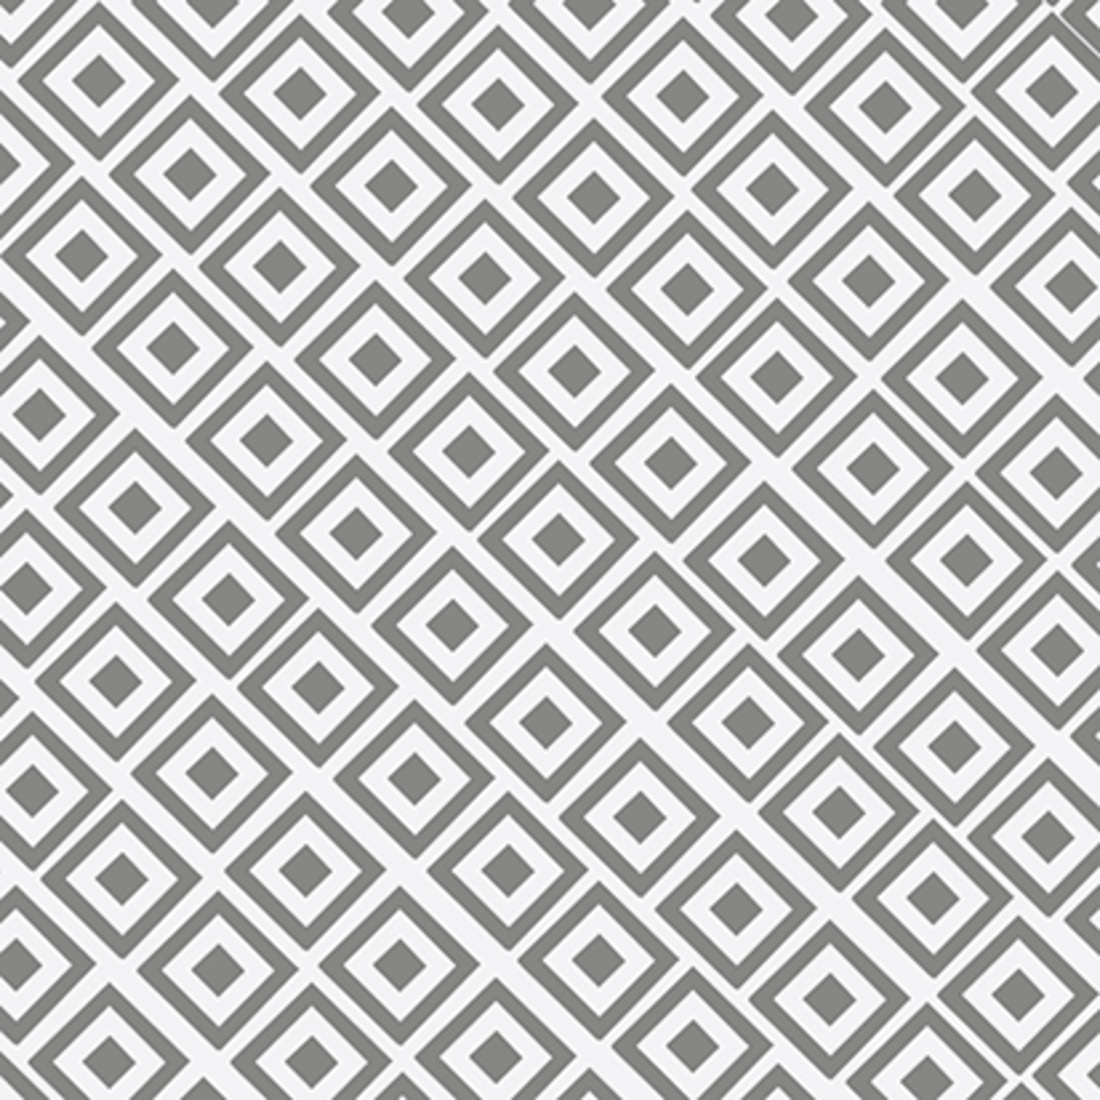 SEAMLESS PATTERNS TEXTURE & KIDS ROOM DECOR pinterest preview image.